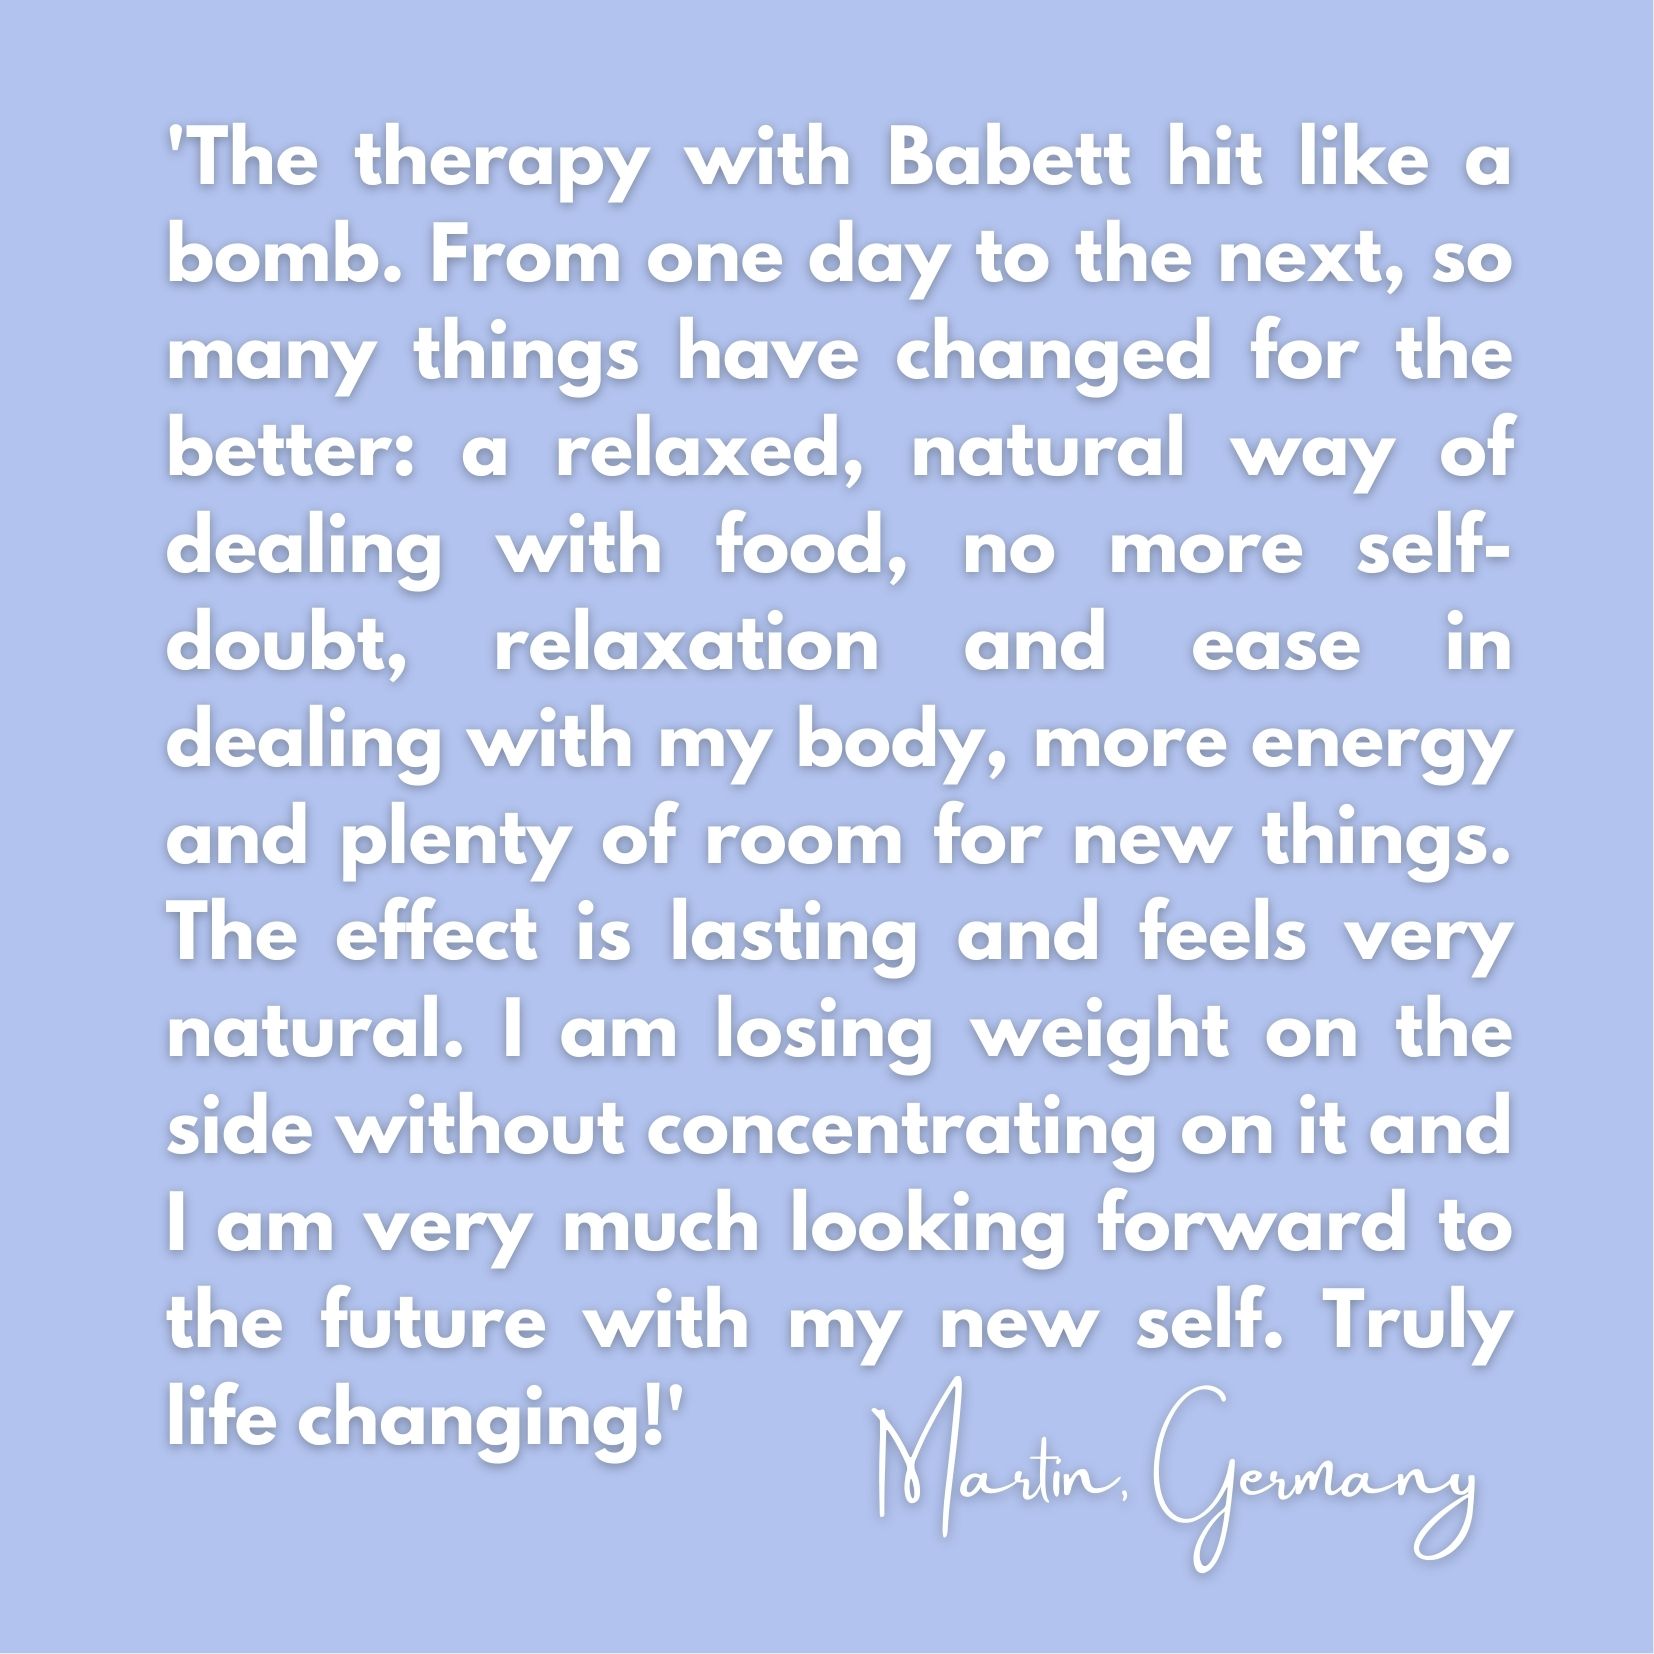 Testimonial for RTT Therapy for successful and easy weight loss: 'The therapy with Babett hit like a bomb. From one day to the next, so many things have changed for the better: a relaxed, natural way of dealing with food, no more self-doubt, relaxation and ease in dealing with my body, more energy and plenty of room for new things. The effect is lasting and feels very natural. I am losing weight on the side without concentrating on it and I am very much looking forward to the future with my new self. Truly life changing!'